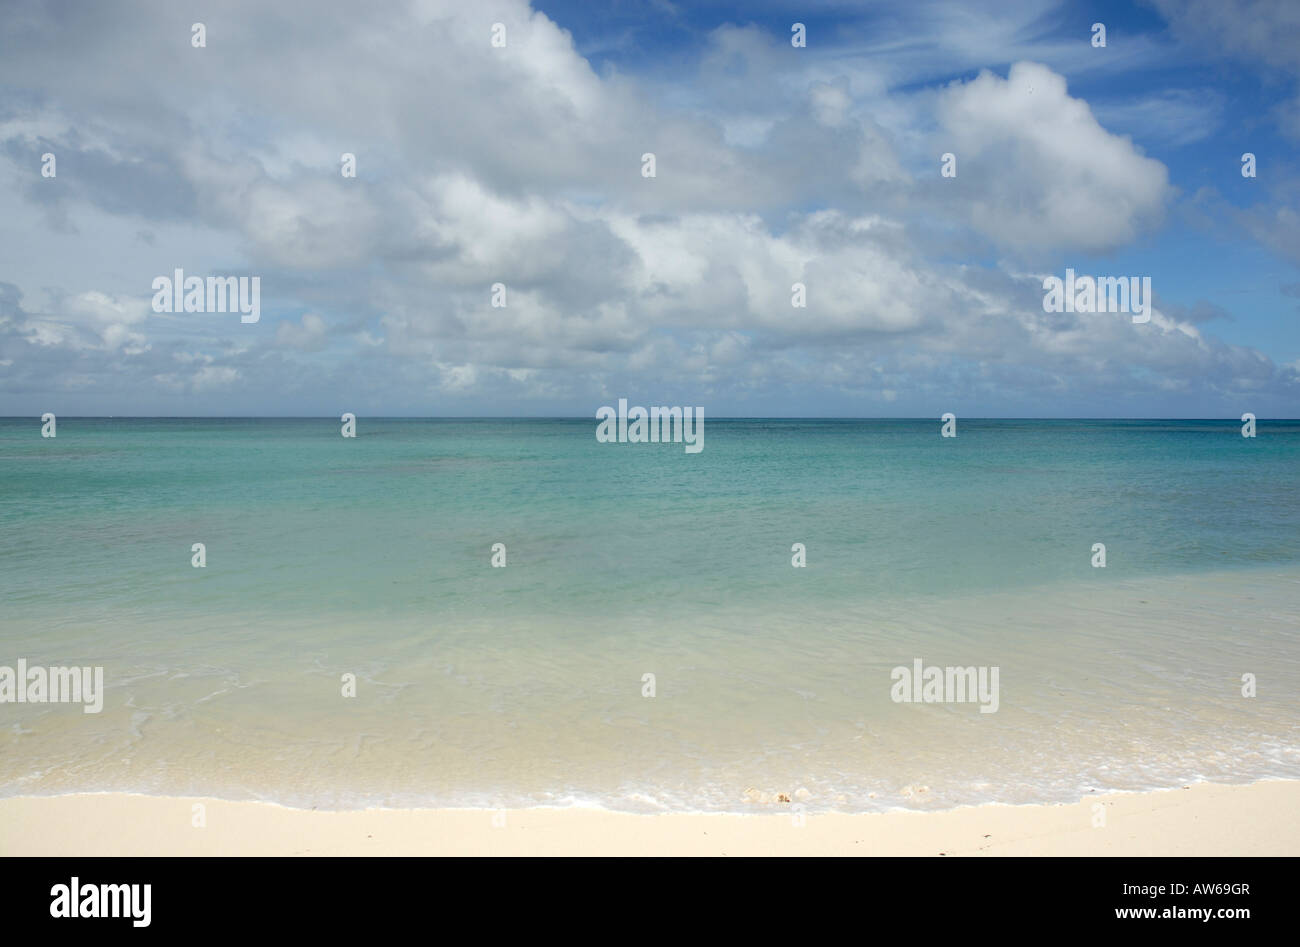 A view of the clear blue waters of the Indian Ocean from one of the pristine beaches on Denis Island in The Seychelles Stock Photo